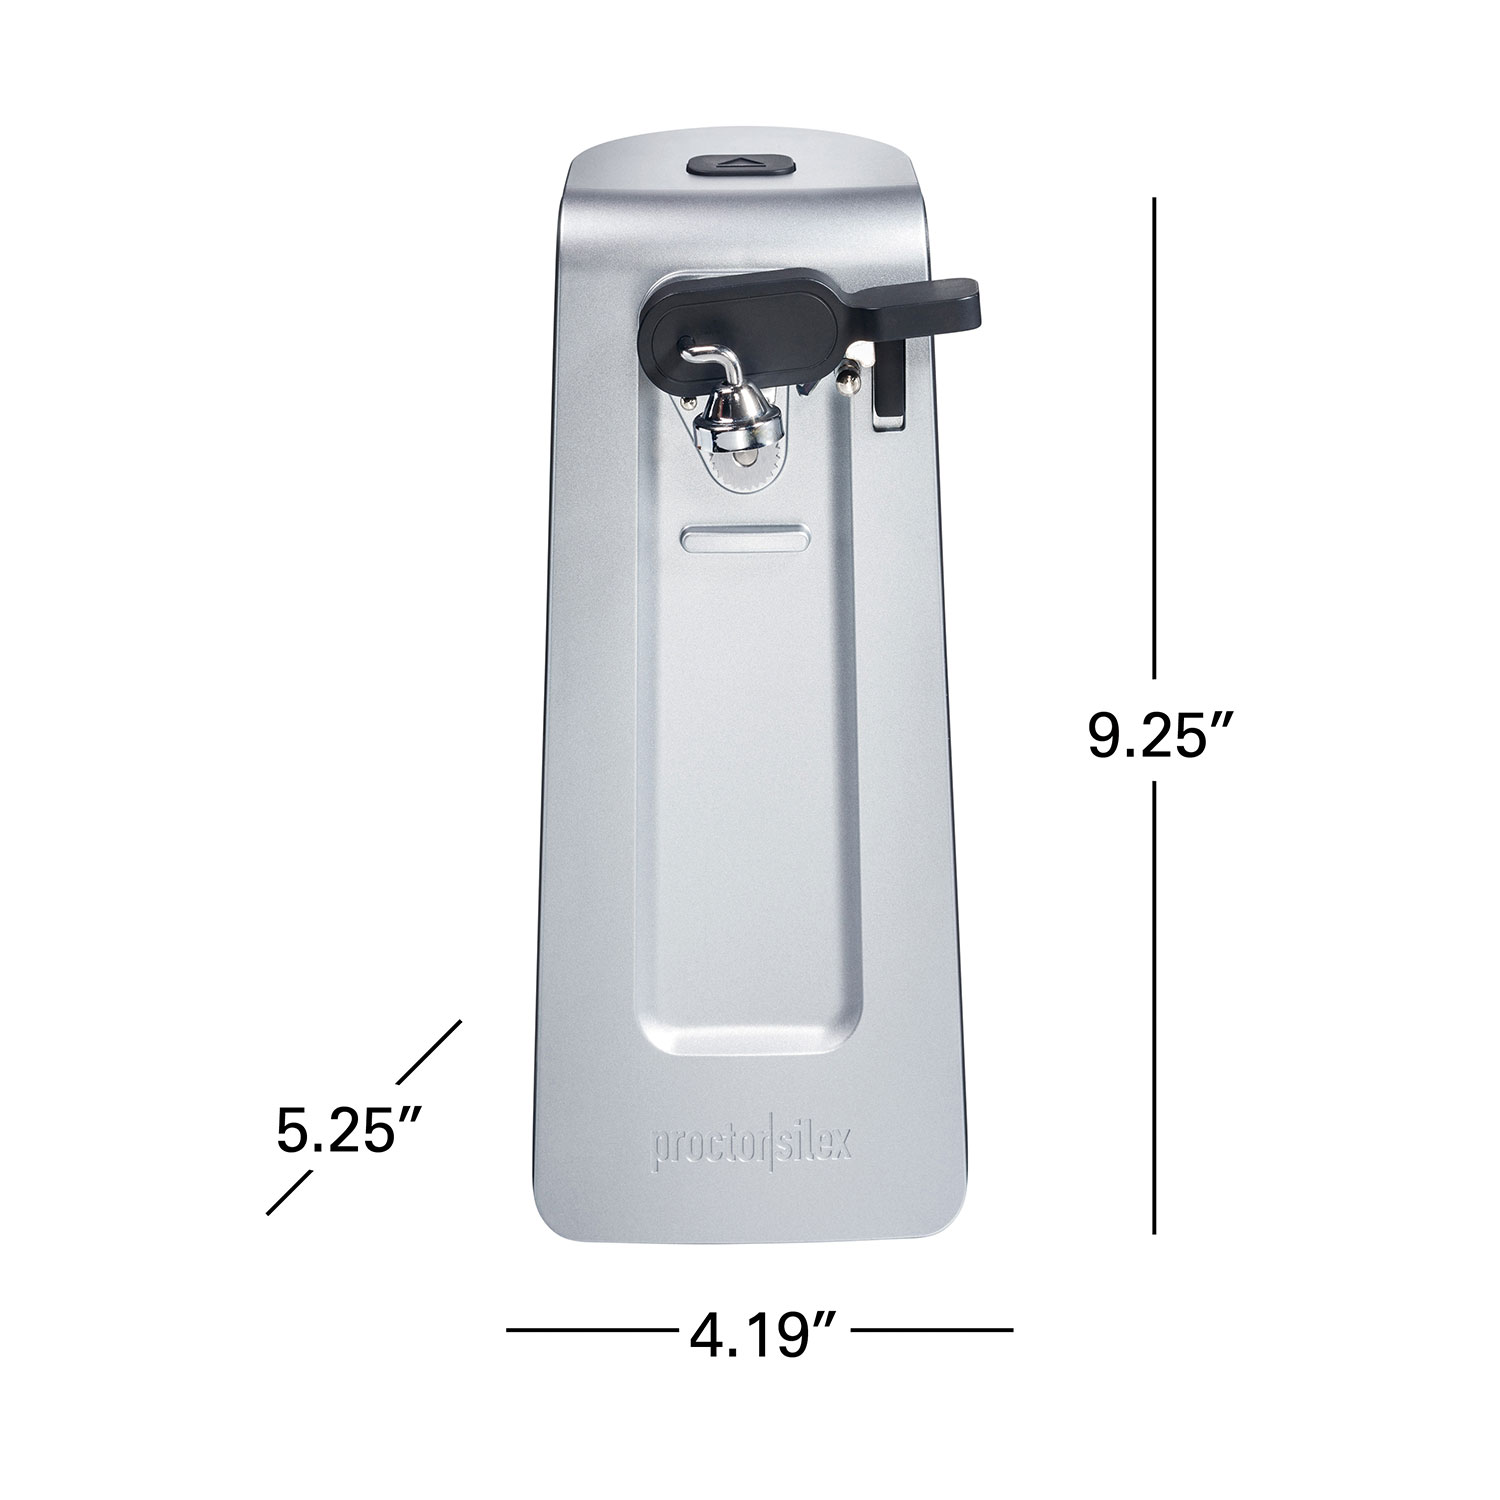 Hamilton Beach Smooth Touch Can Opener & Reviews